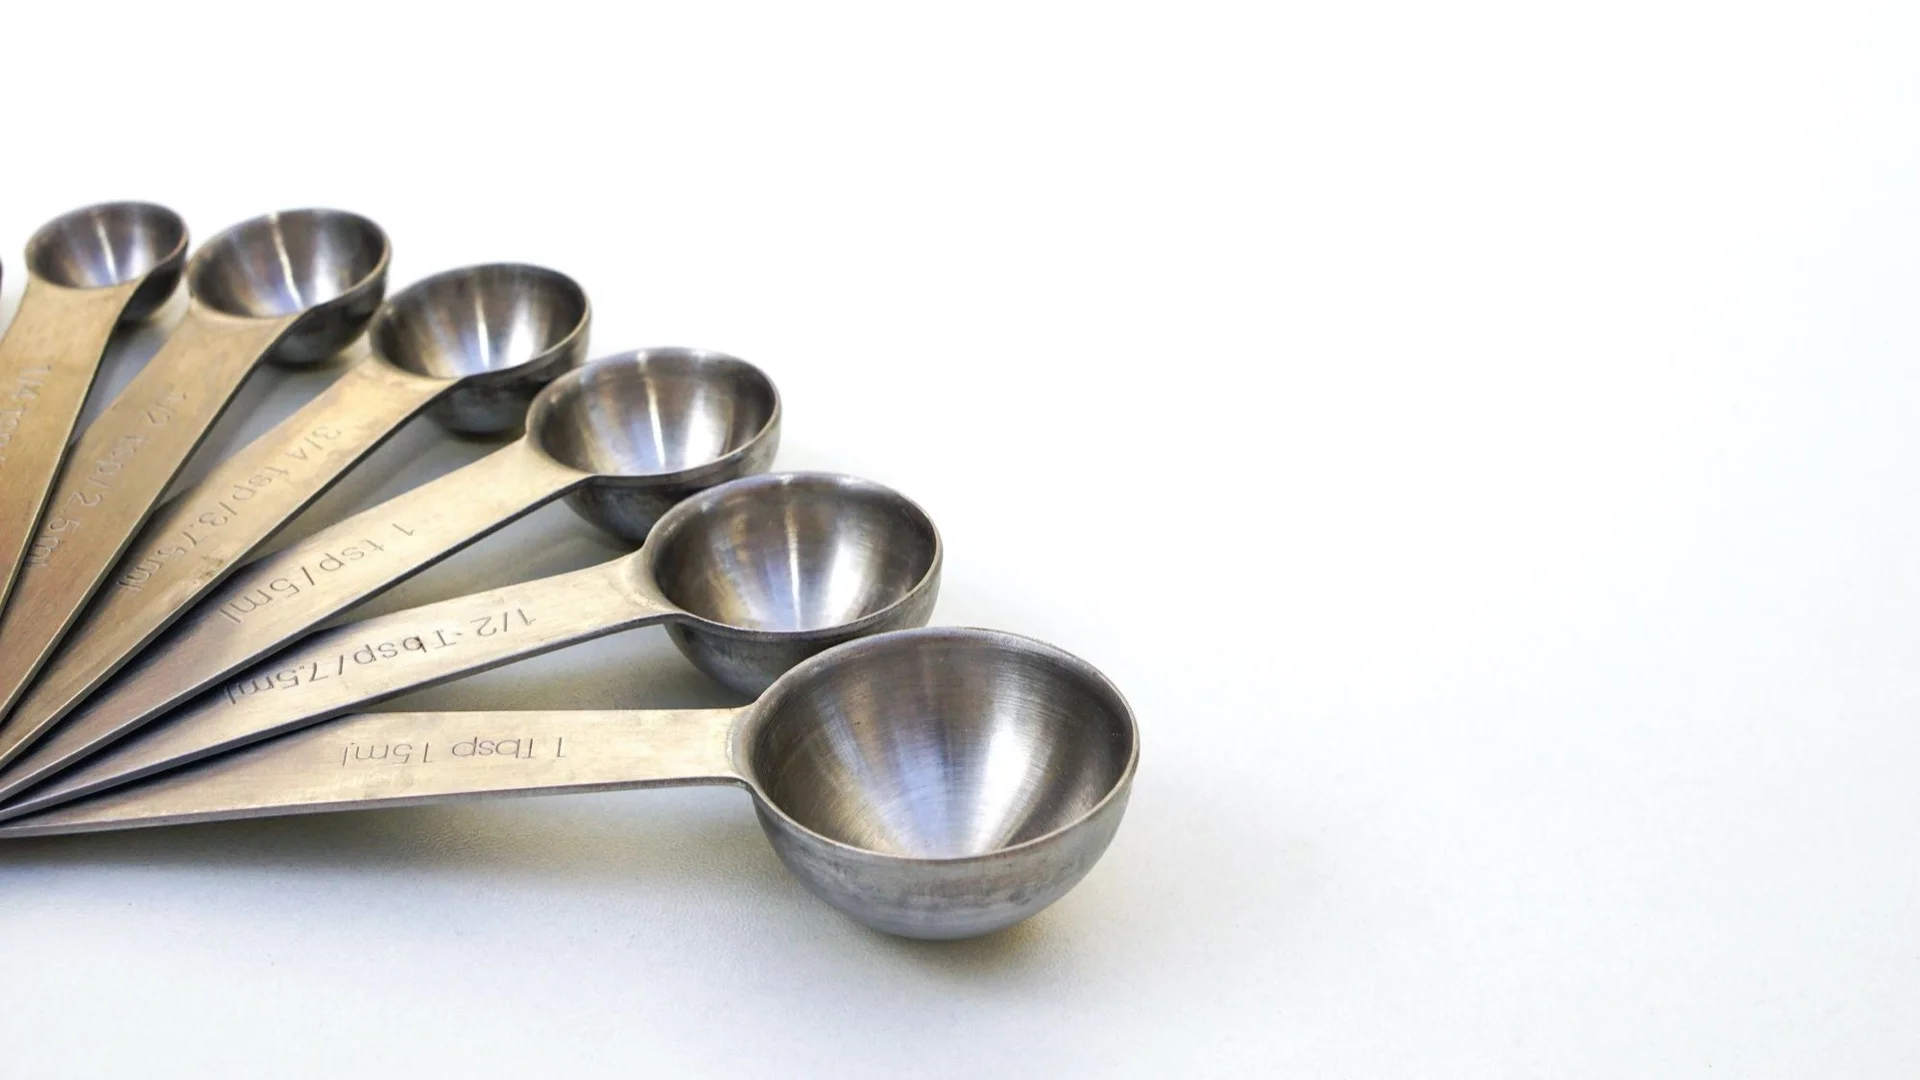 Measuring Spoons on the Market